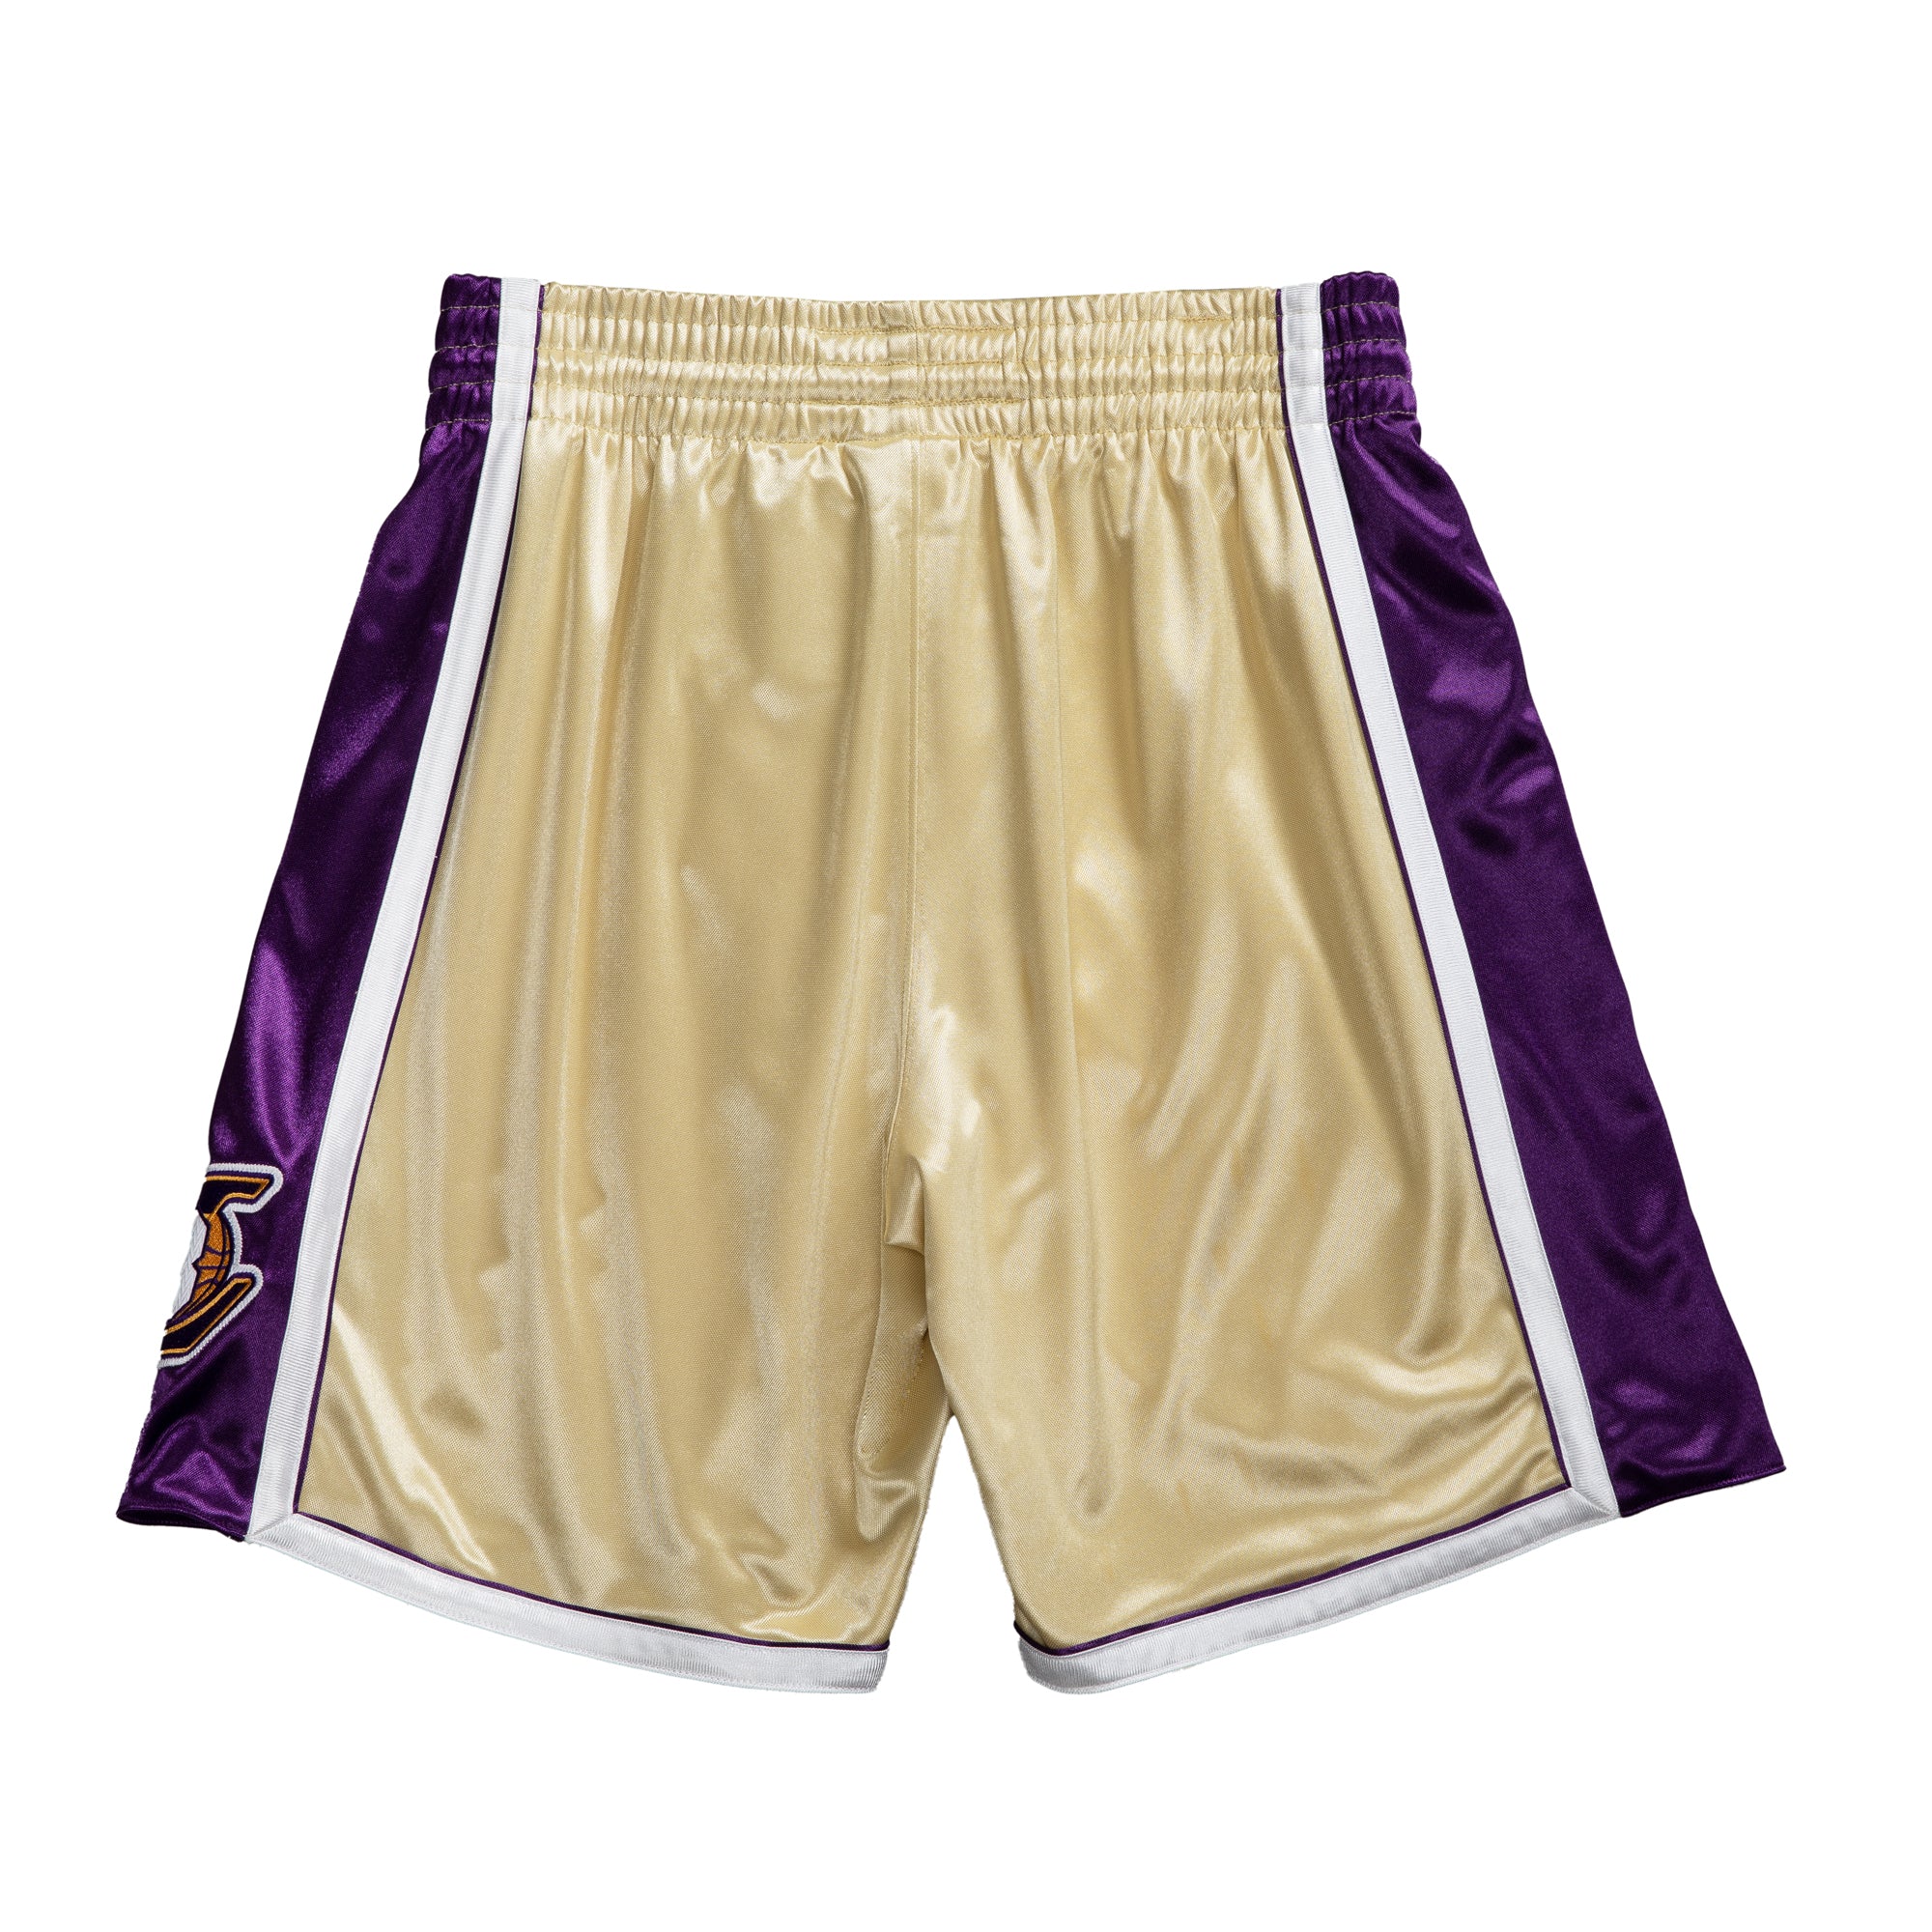 Exclusive Los Angeles Lakers Kobe Bryant Hall of Fame #8 Authentic Shorts